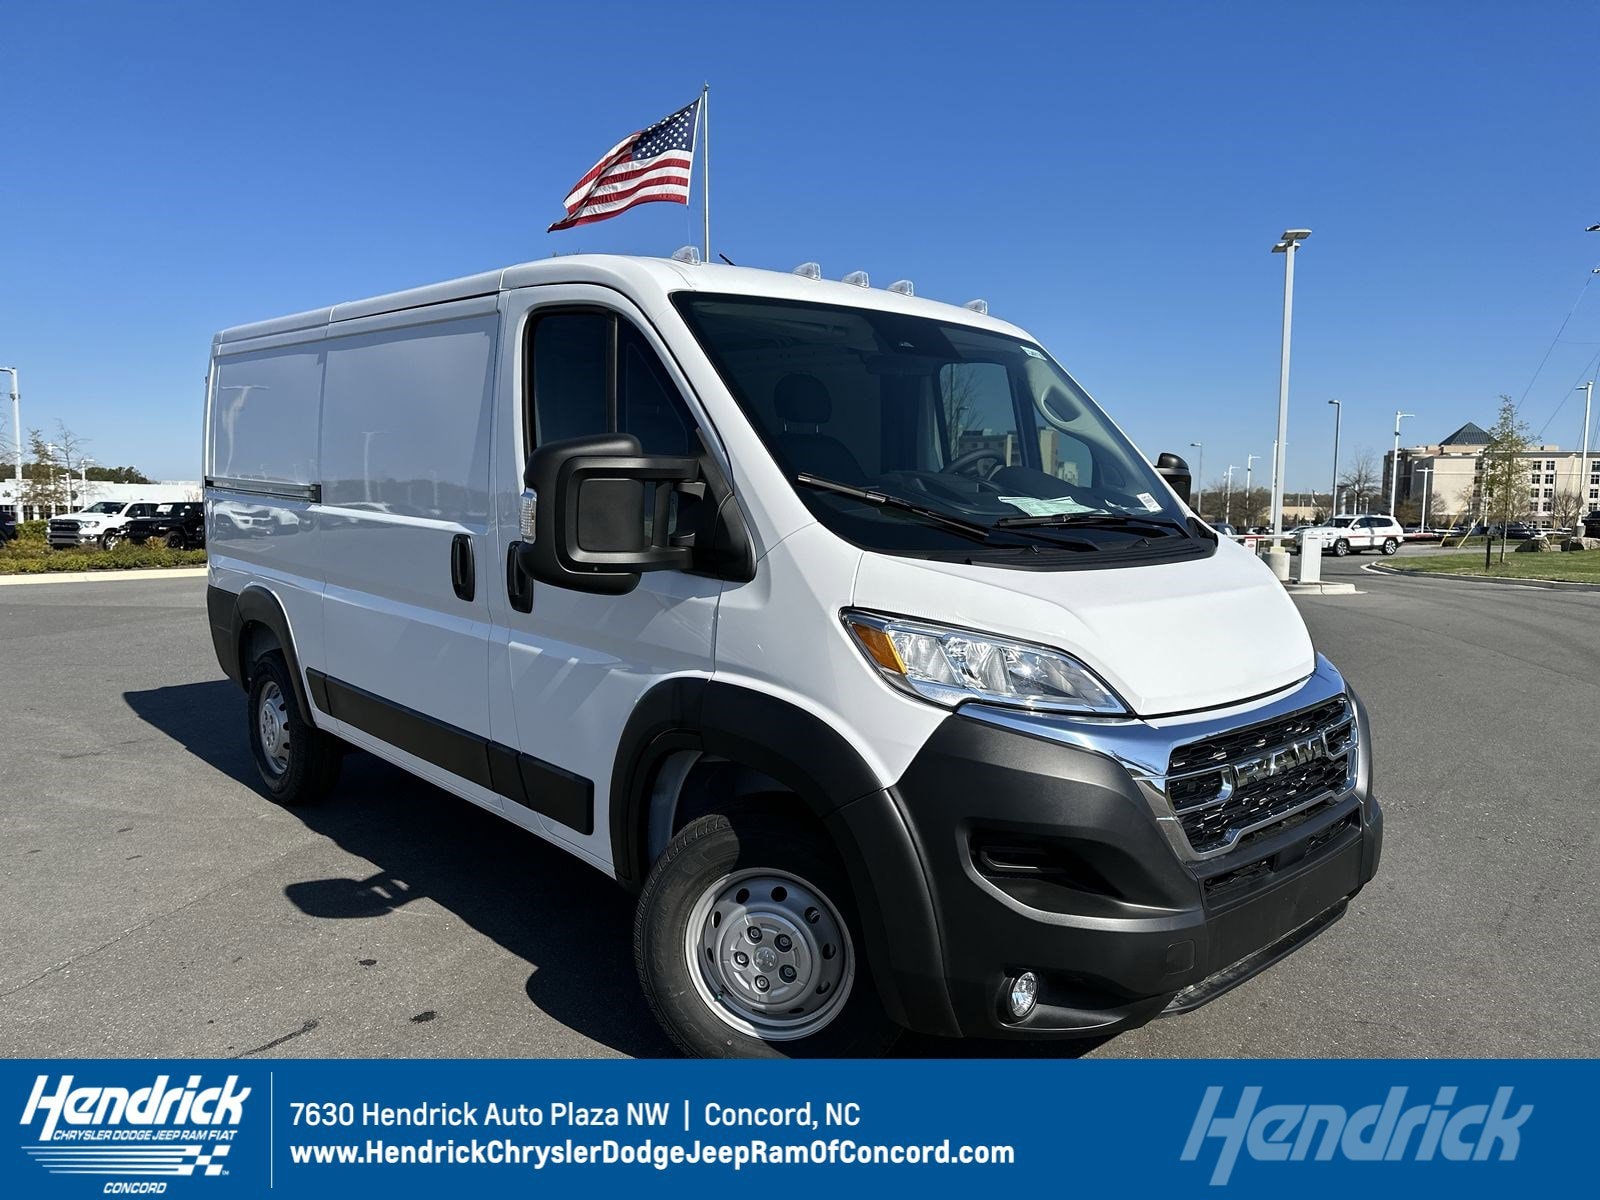 New 2023 Ram ProMaster For Sale in Concord - VIN: 3C6LRVVG3PE536424 |  Hendrick Automotive Group